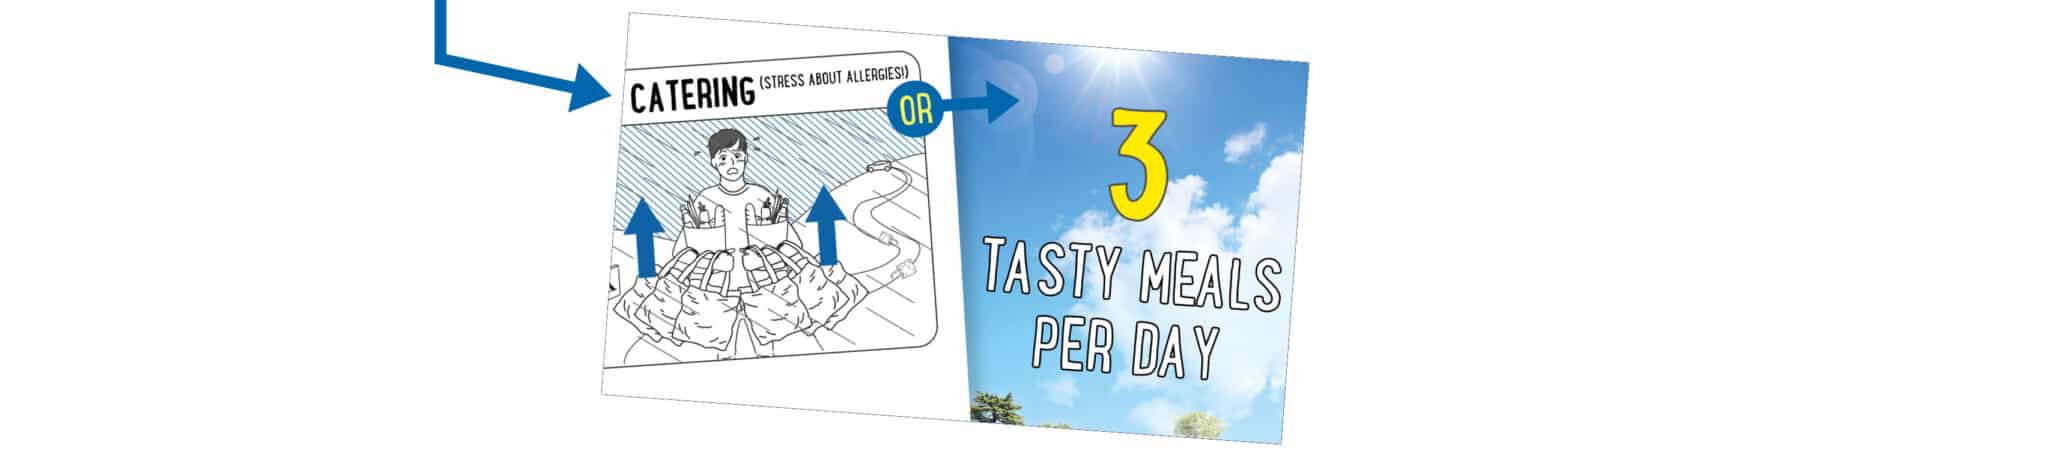 Catering - 3 Tasty Meals Per Day